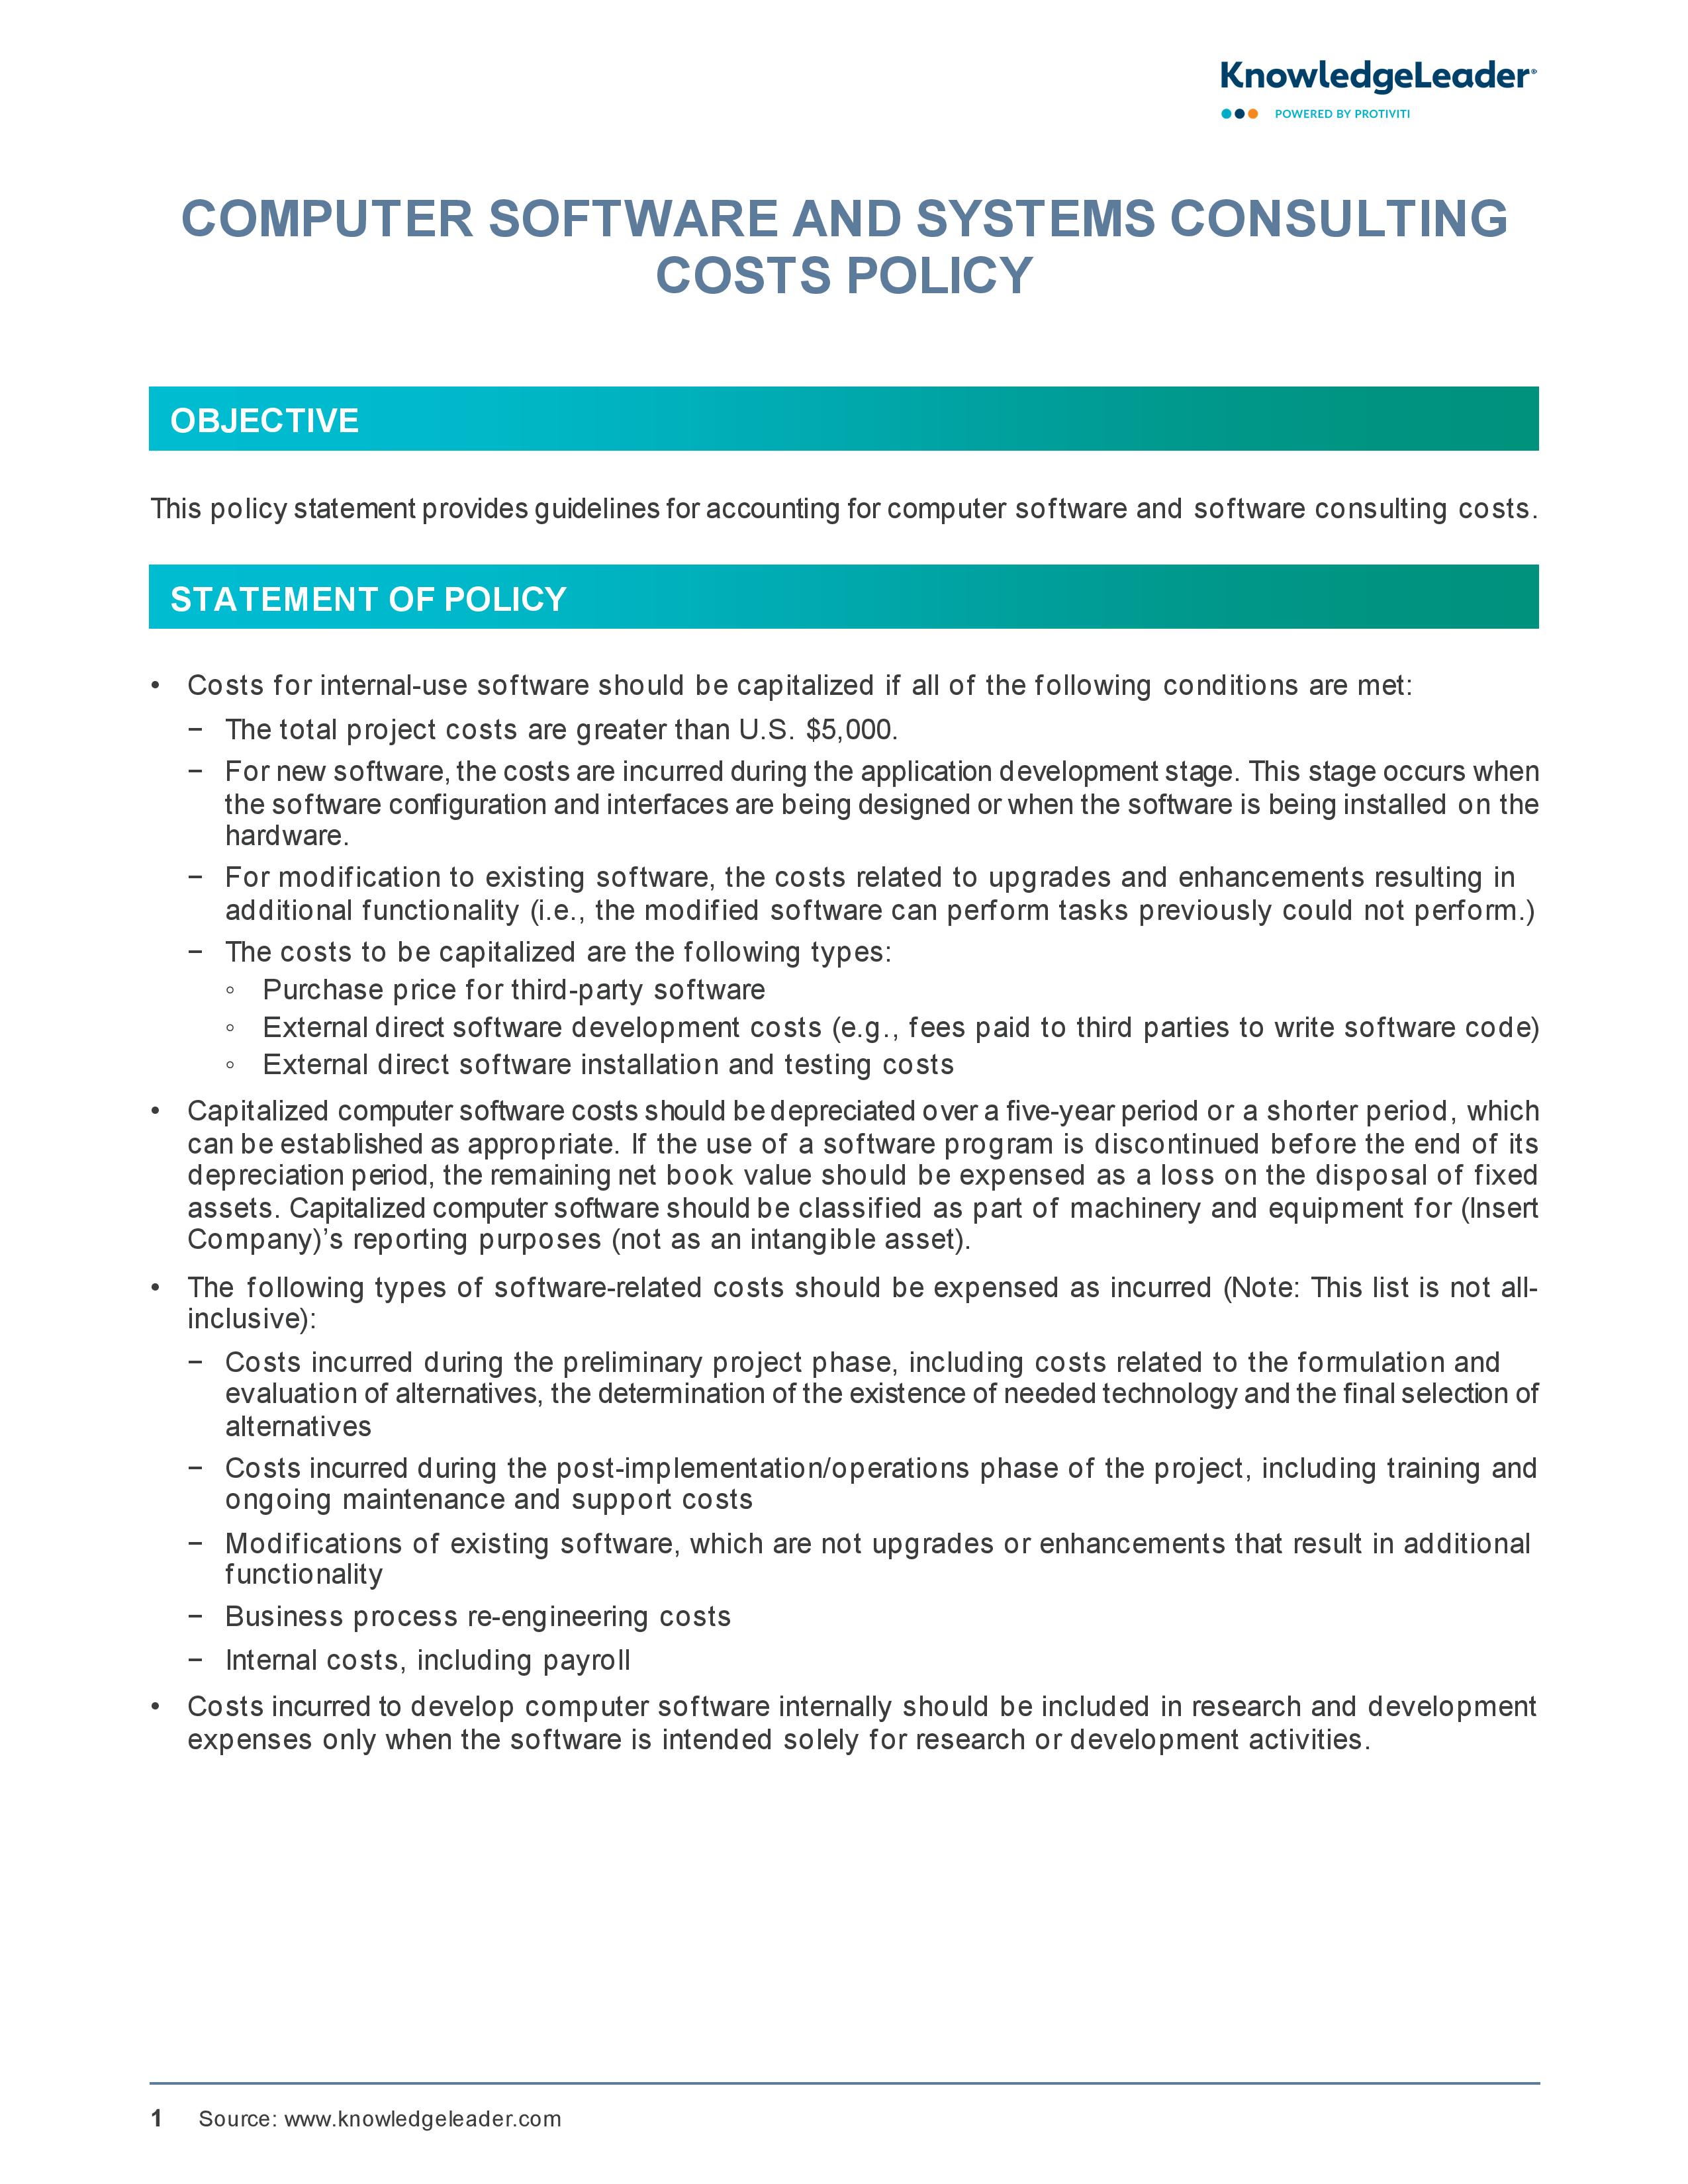 screenshot of the first page of Computer Software and Systems Consulting Costs Policy